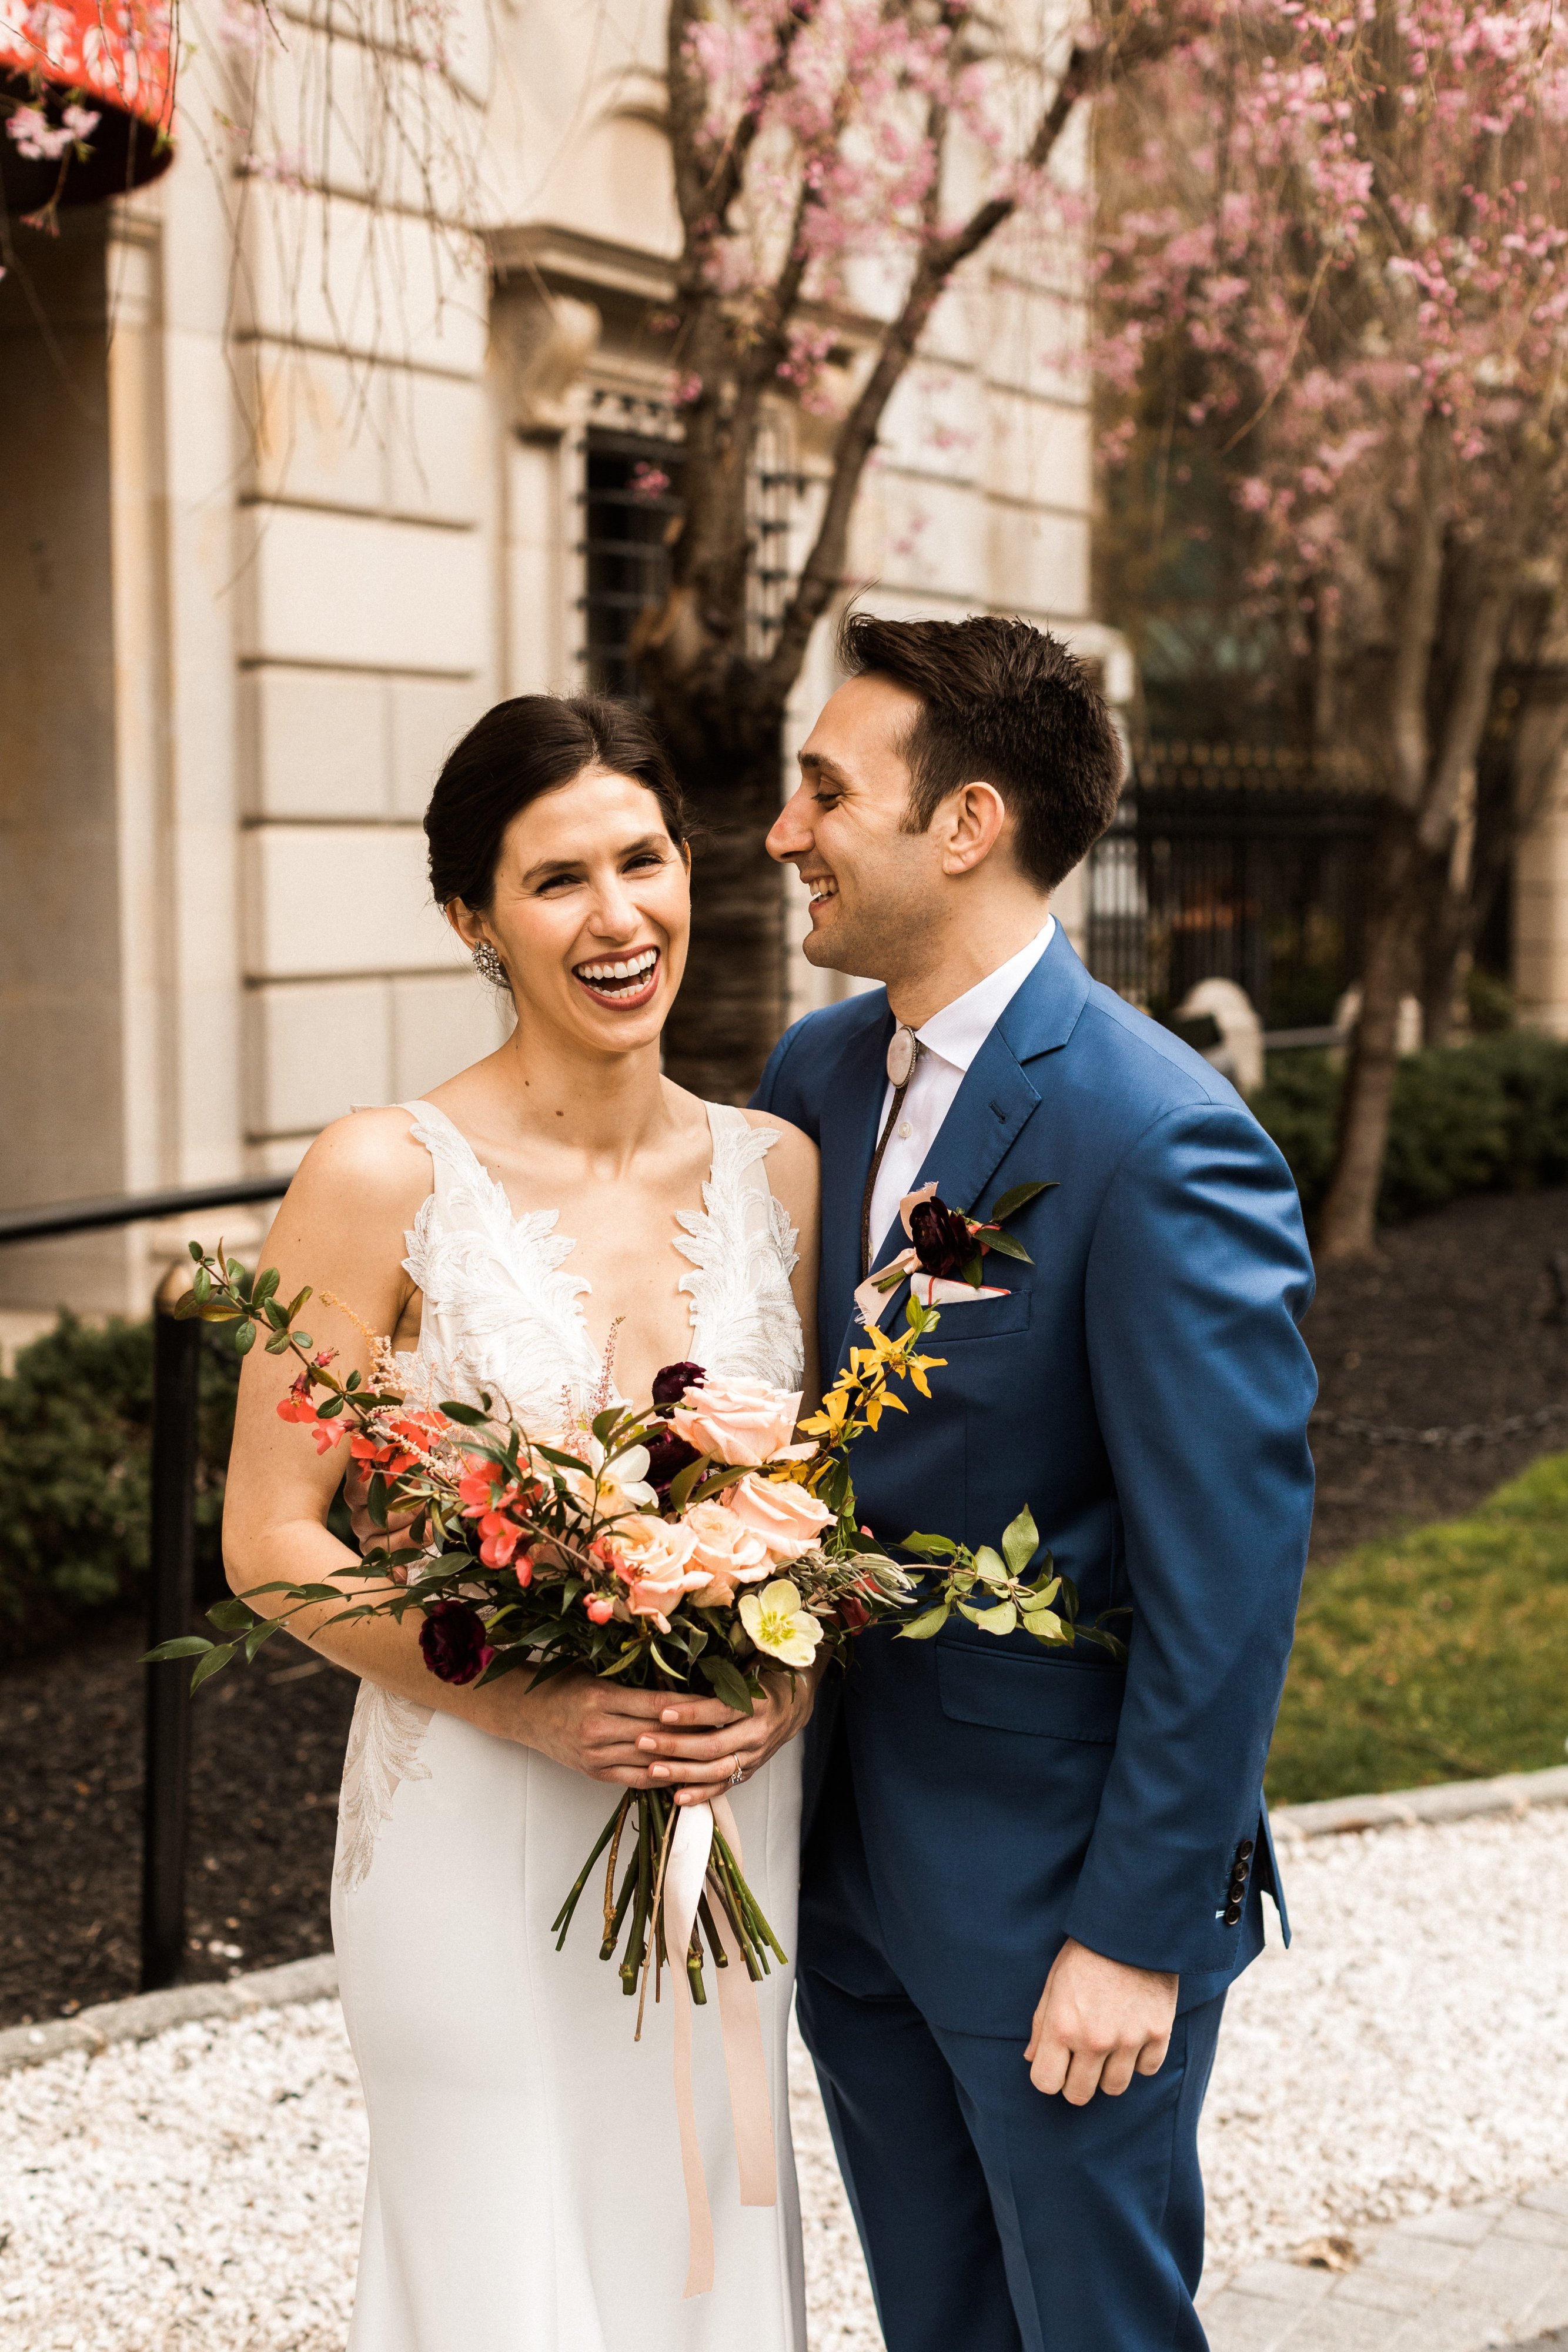 Caroline Wood and Chris Proto's elopement in Rawlins Park, Washington, DC March 21, 2020. Following recommendations from the CDC regarding social distancing to prevent the spread of COVID-19, Caroline and Chris made the difficult decision to postpone their